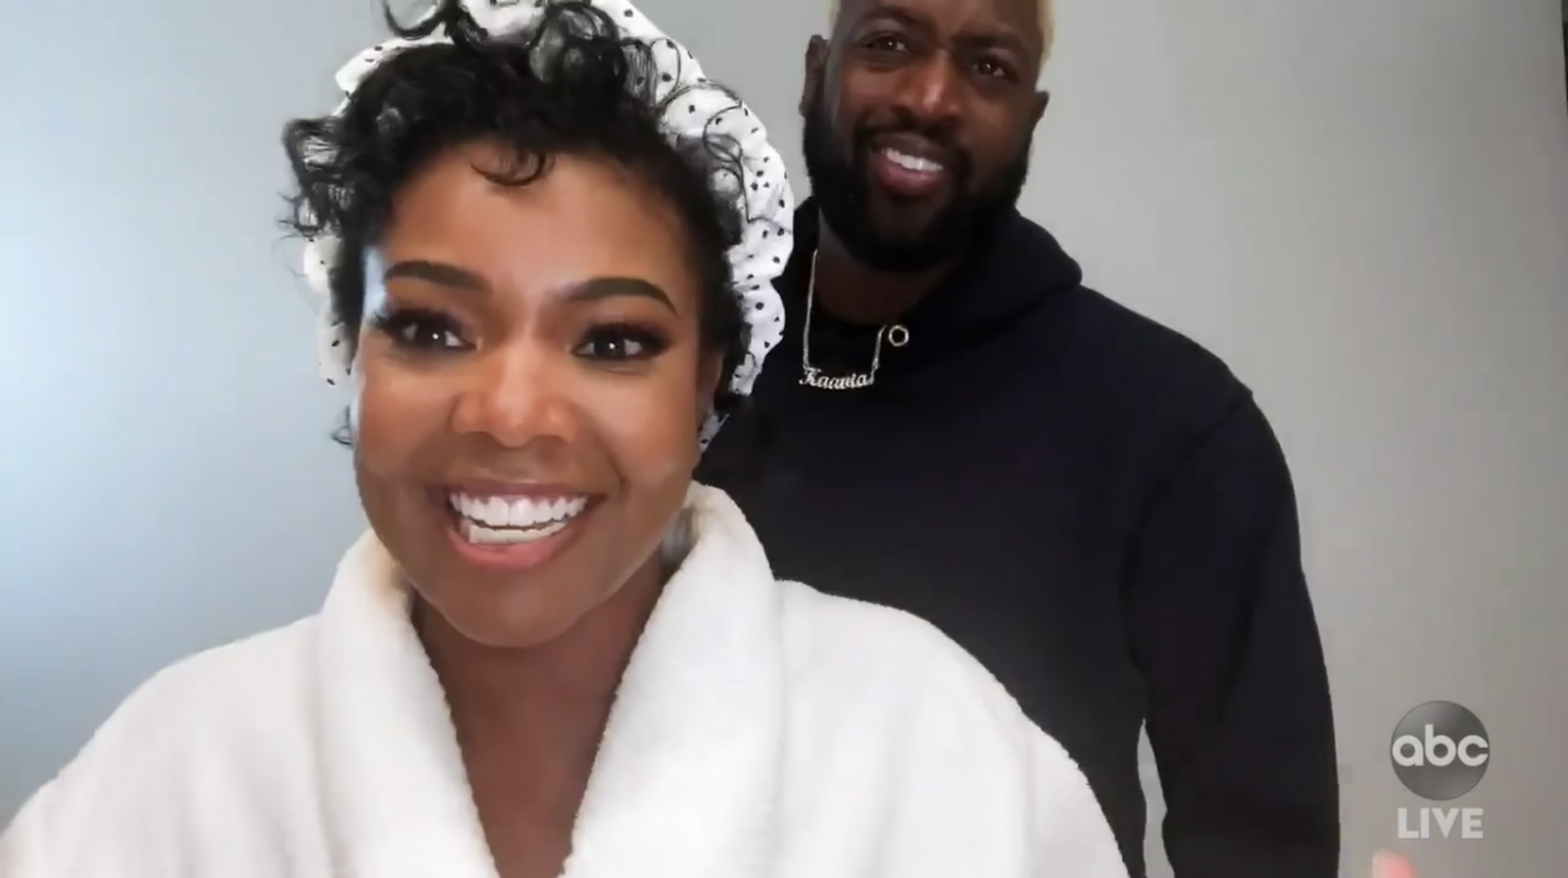 Gabrielle Union And Dwayne Wade's 'Insecure' Emmys Moment Stole The Show